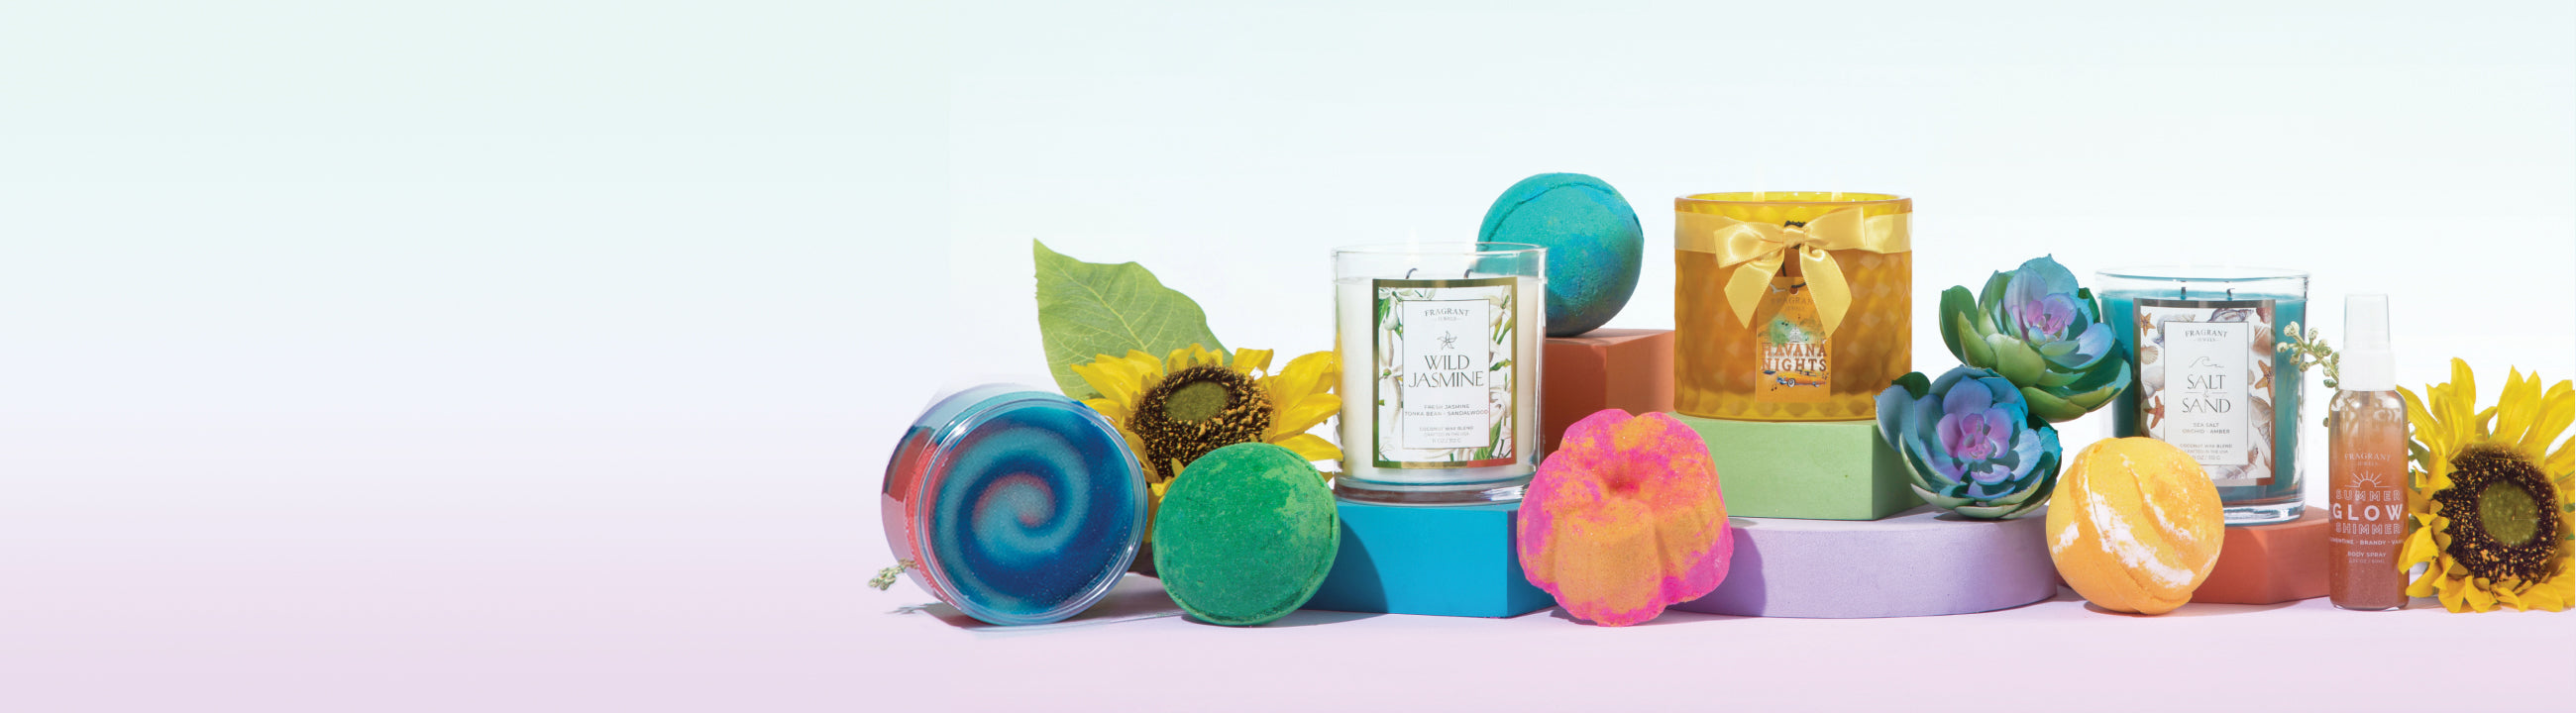 Summer Candles and Bath Bombs